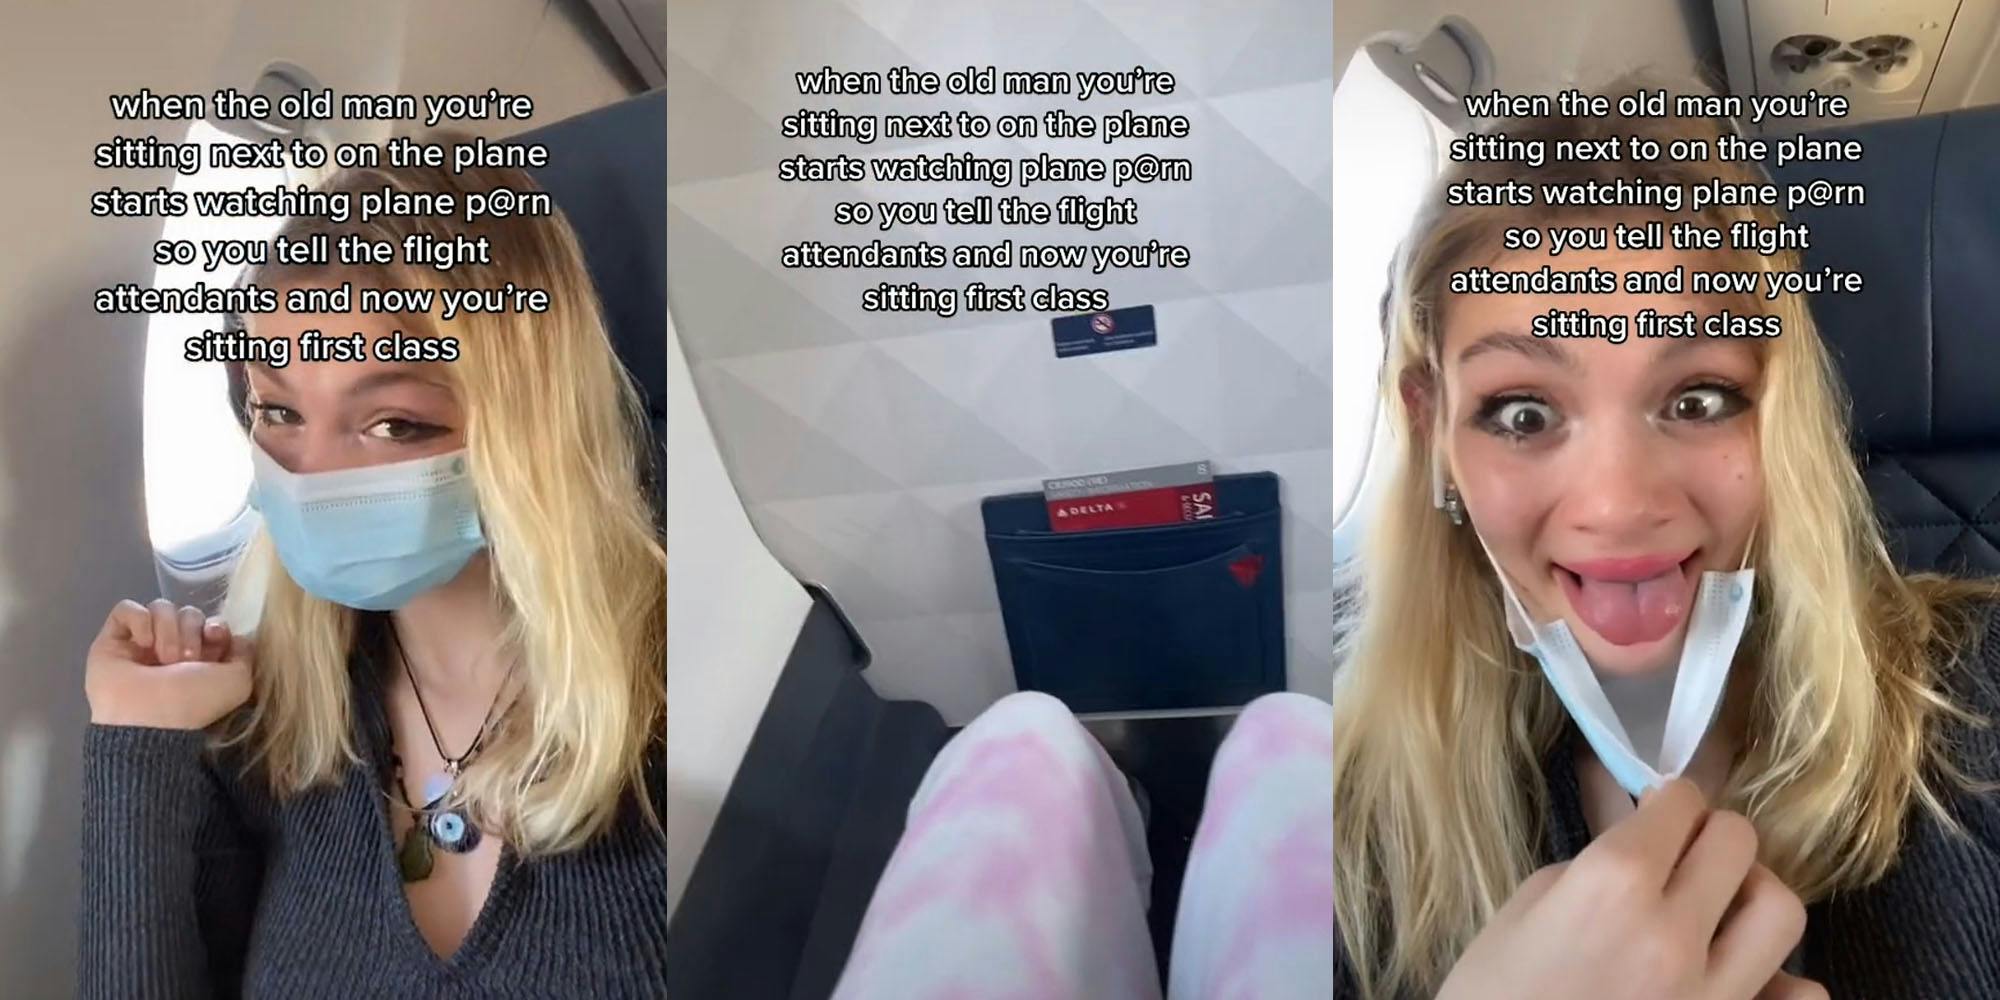 Flight Attendants Looking For Sex - TikToker's Plane Seatmate Watches Porn Next to Her